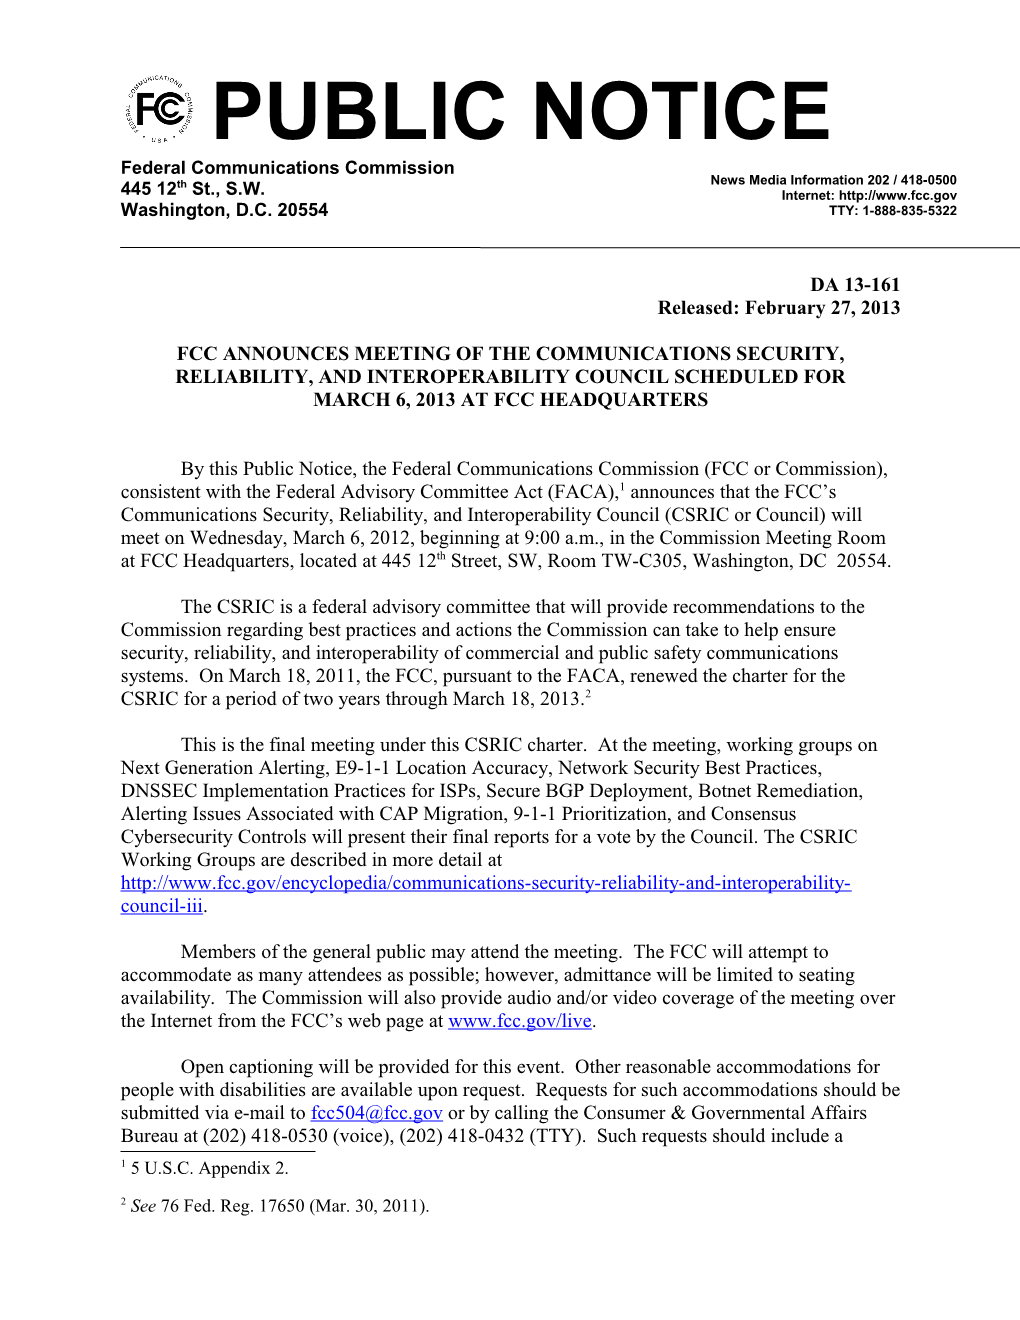 Fcc Announces Meeting of the Communications Security, Reliability, and Interoperability